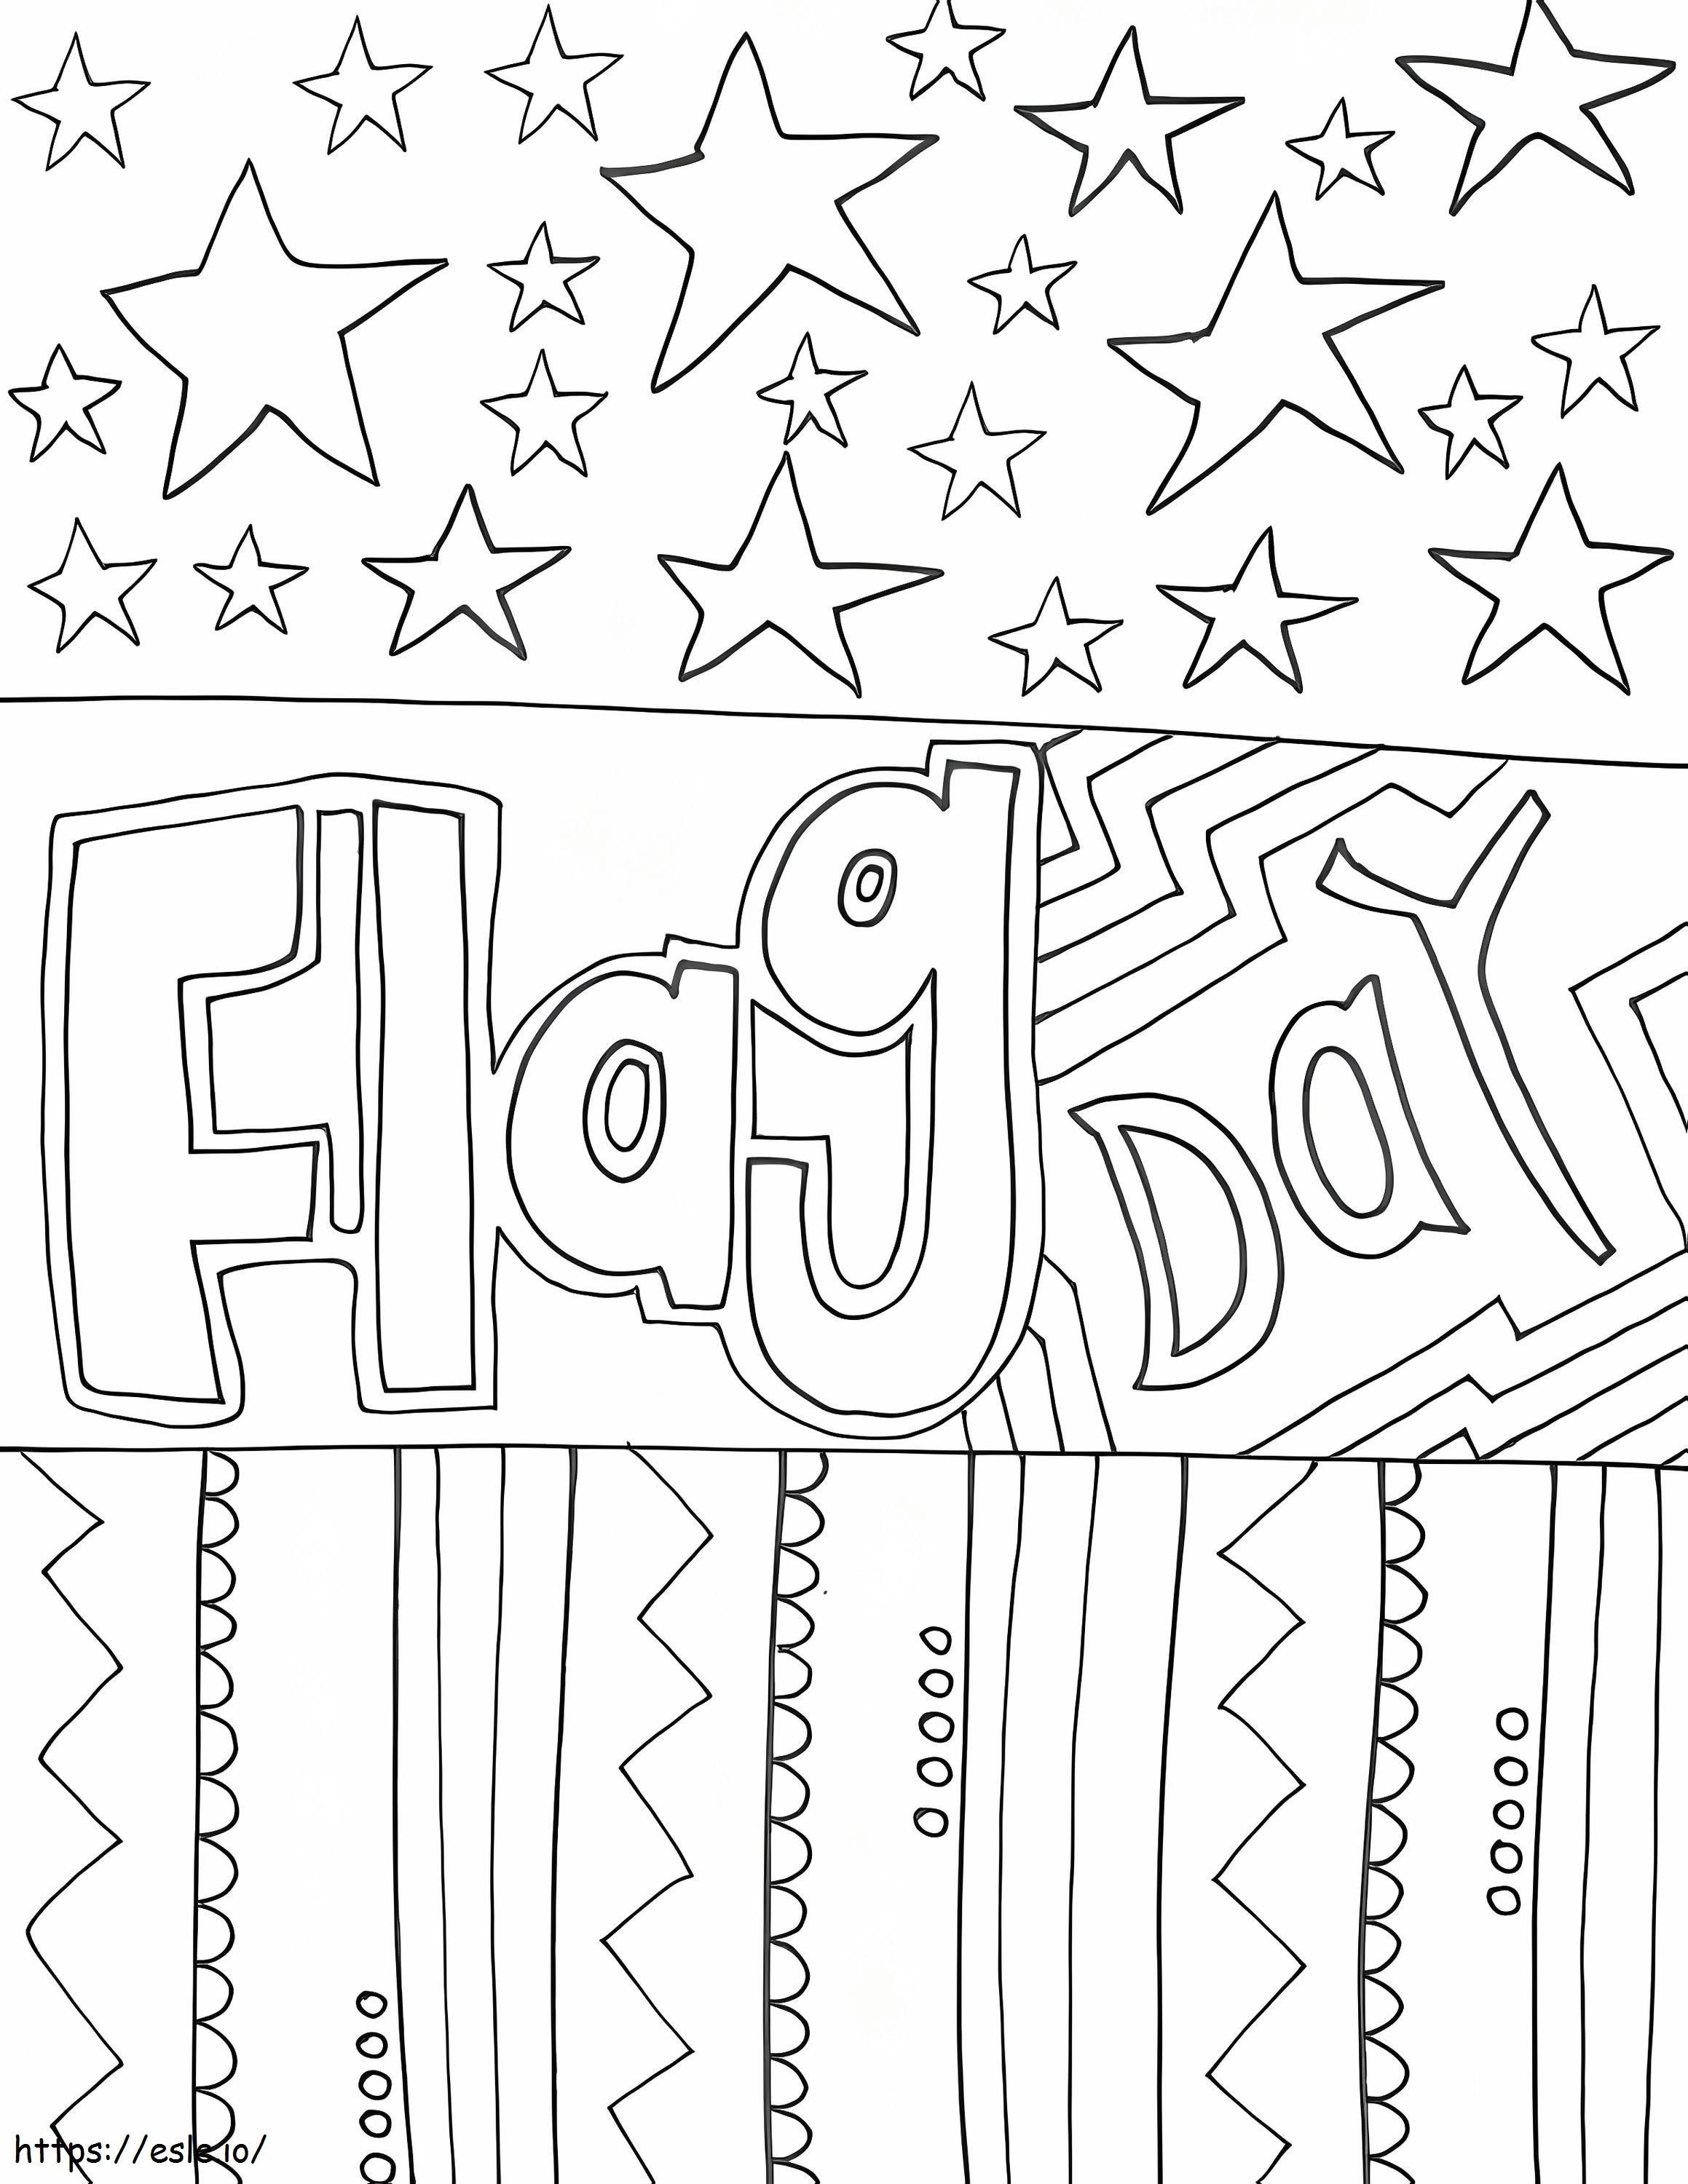 Flag Day 1 coloring page